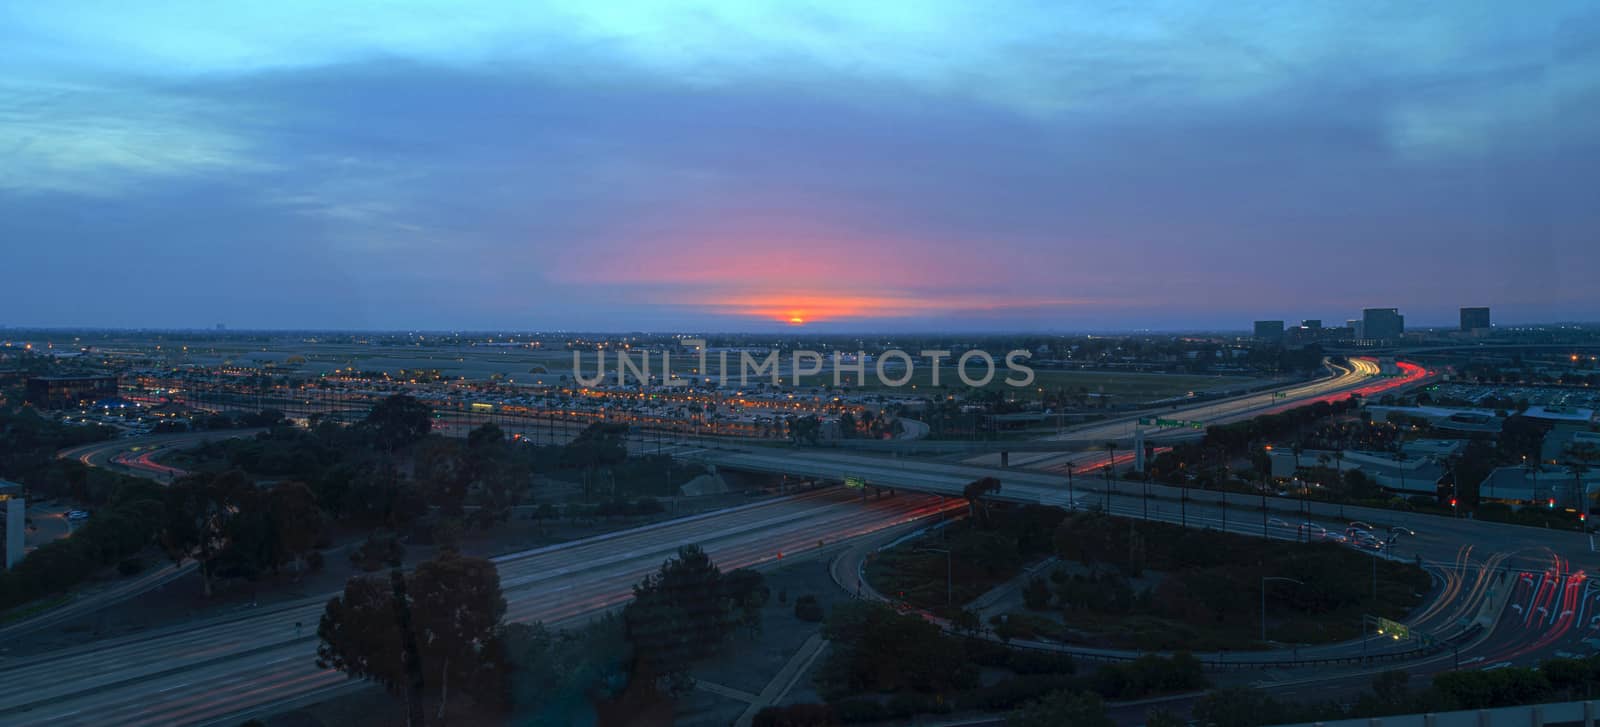 Aerial view of John Wayne Airport in Orange County, California, at sunset with rain in the air light trails across the 405 highway in front.